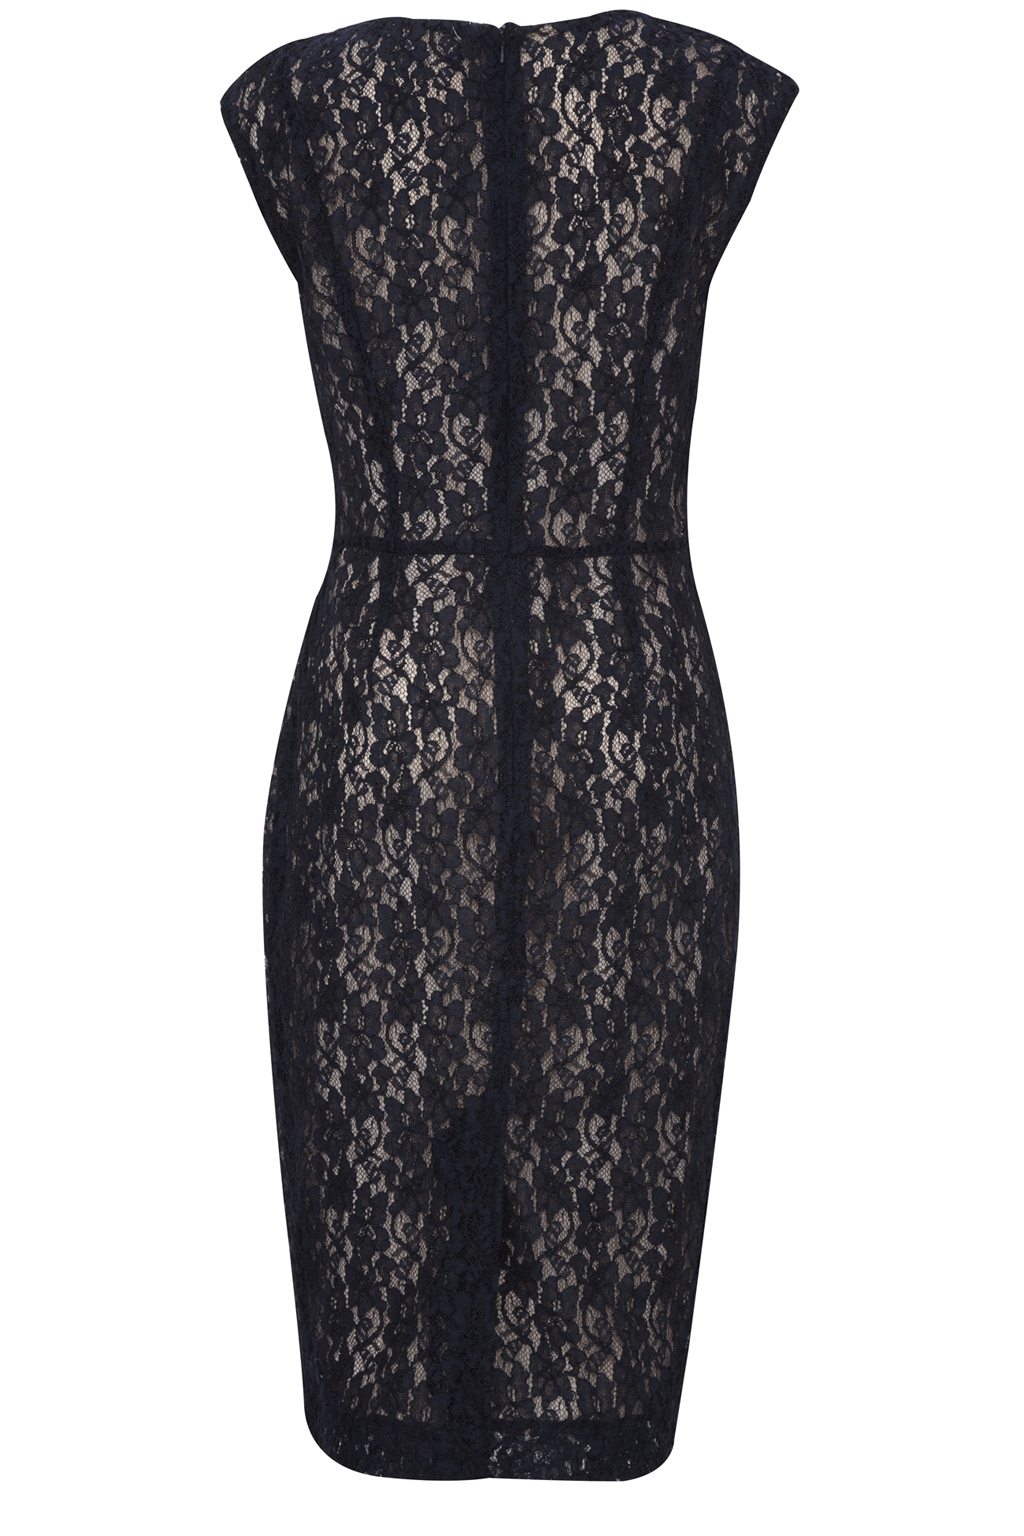 French Connection Angela Lace Dress in Black - Lyst